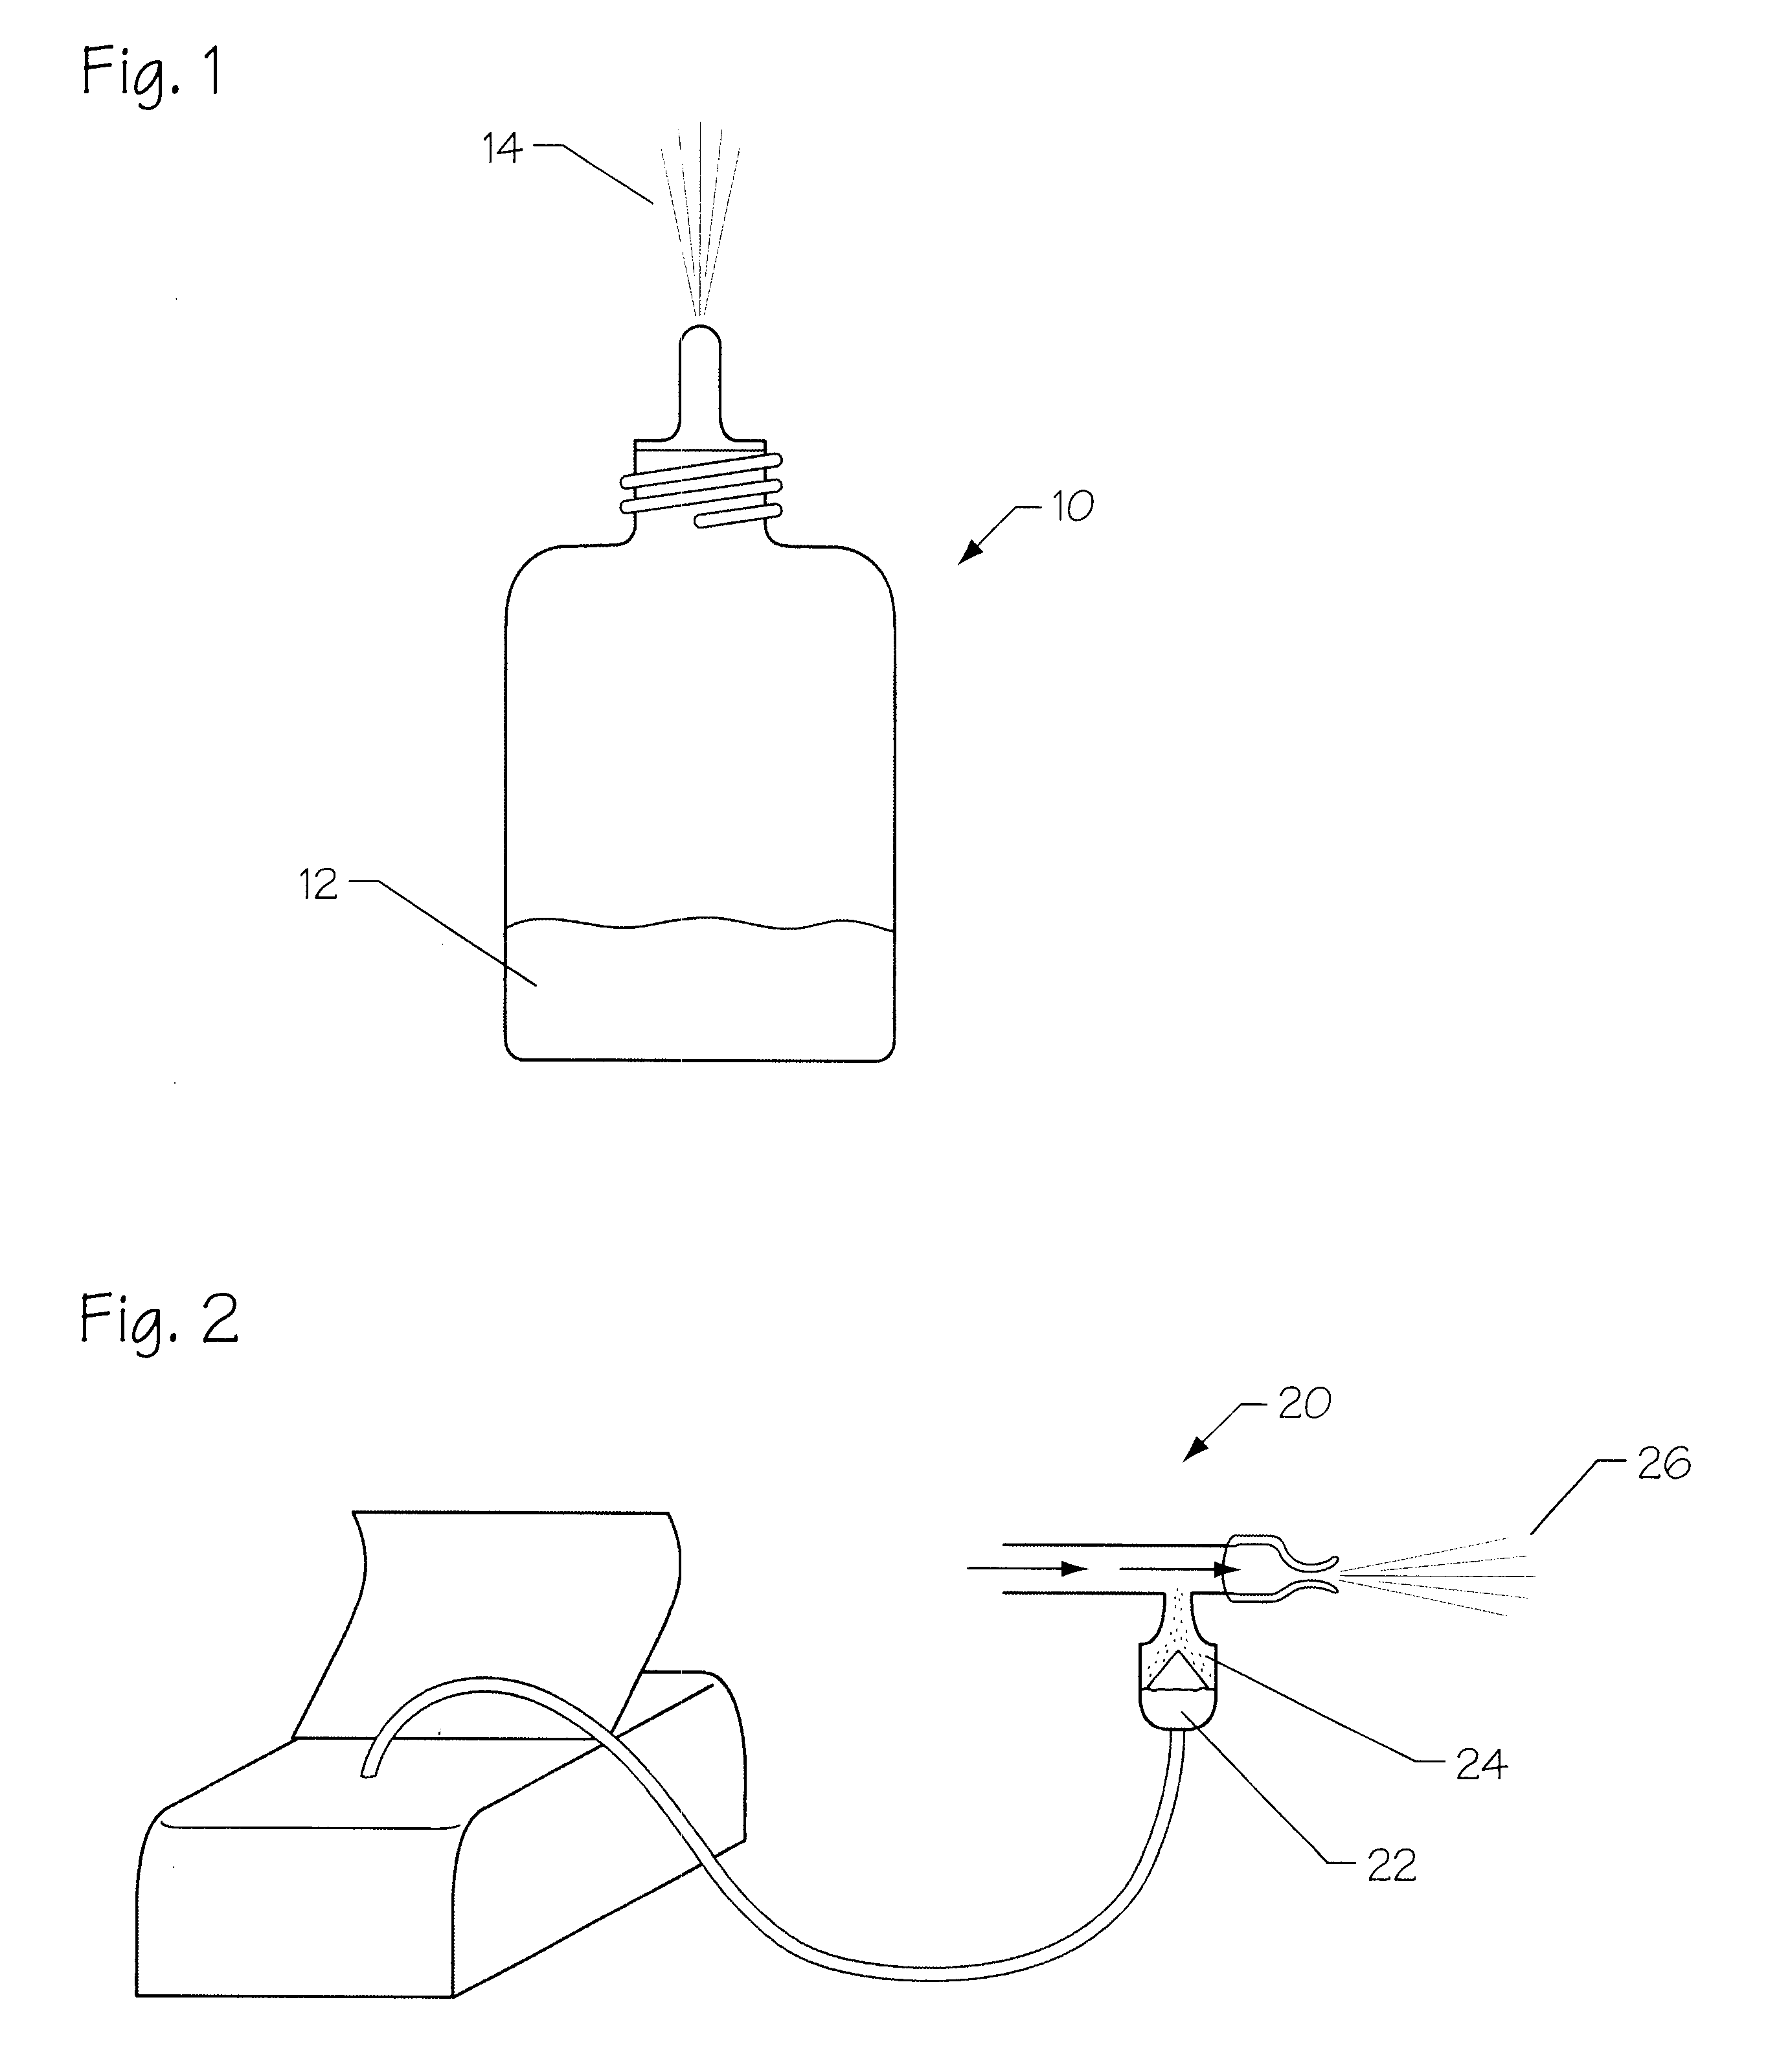 Respiratory infection treatment device